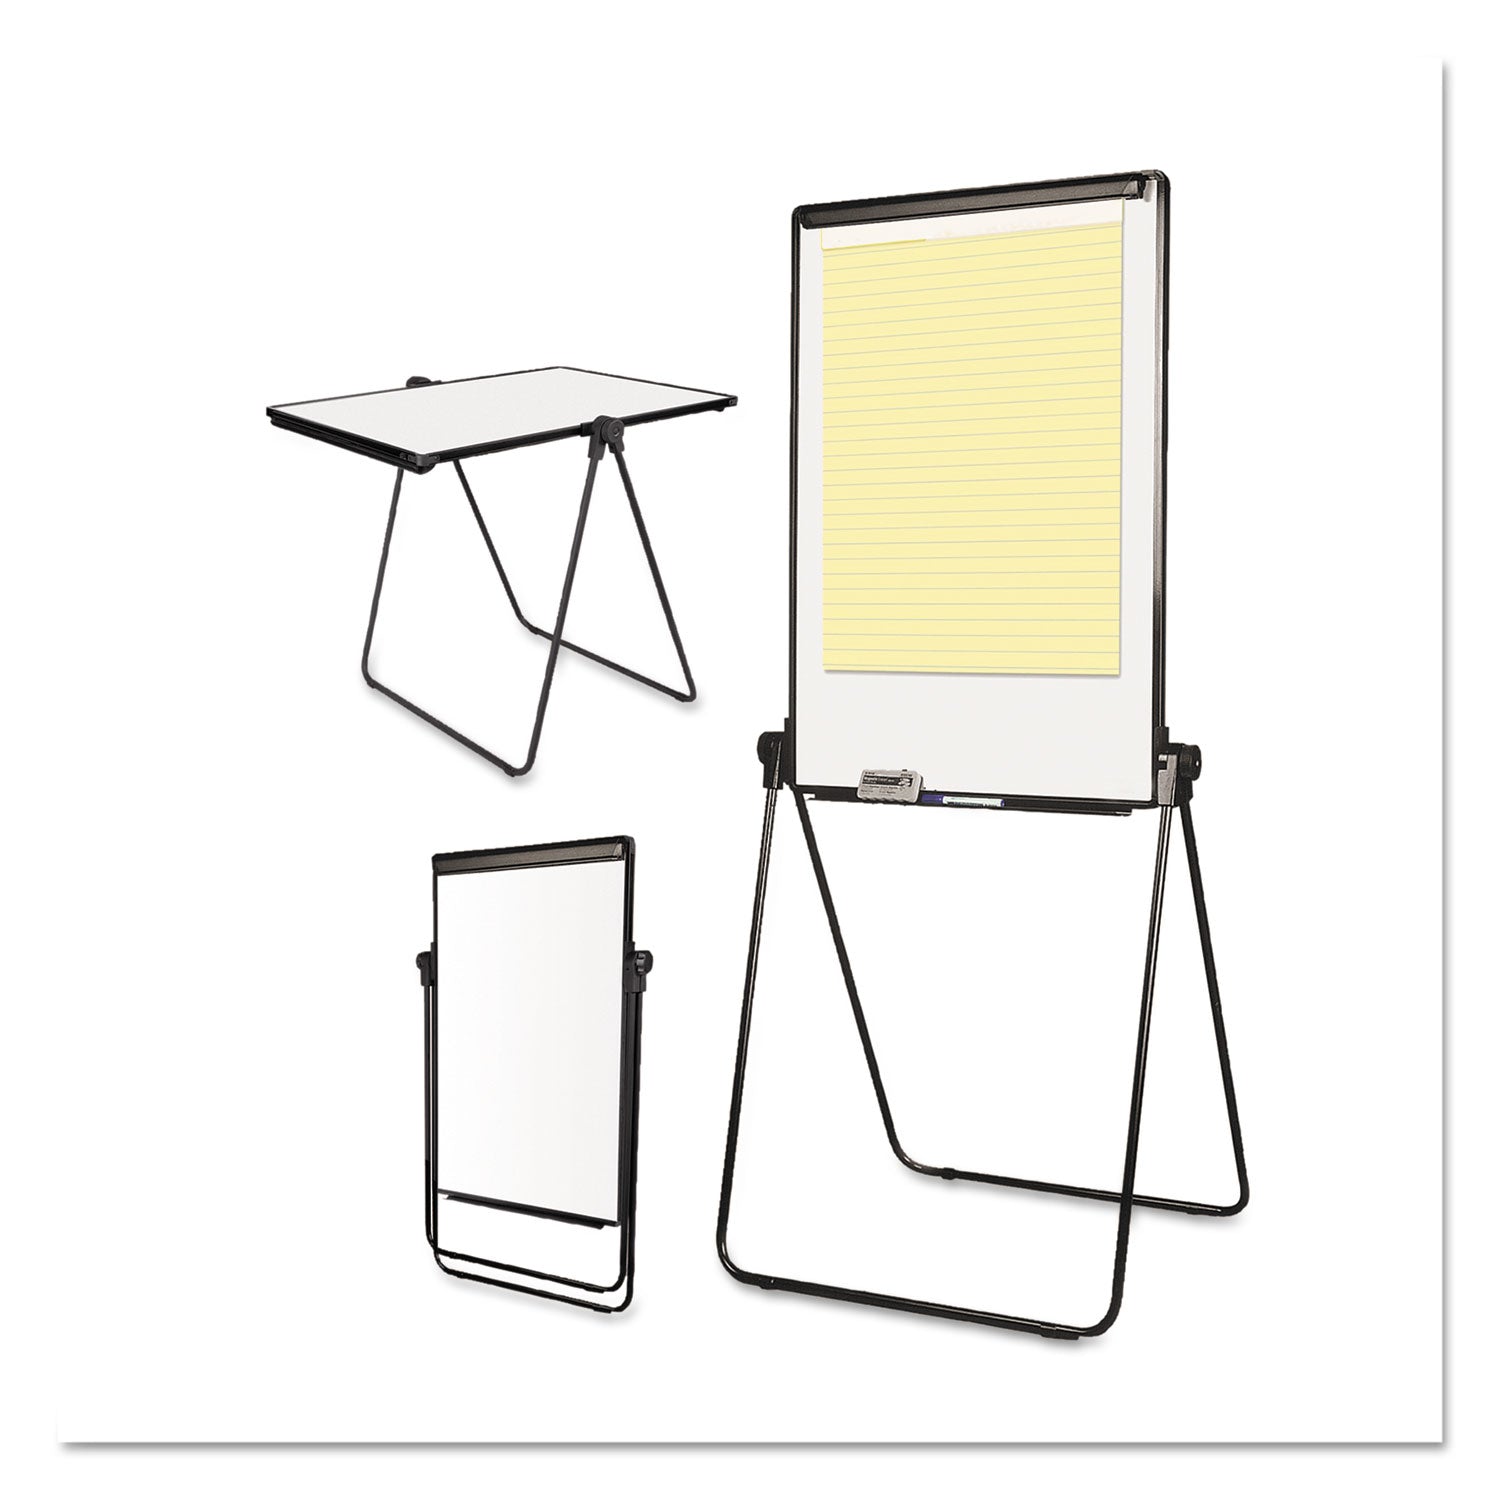 Folds-to-a-Table Melamine Easel, 28.5 x 37.5, White, Steel/Laminate - 